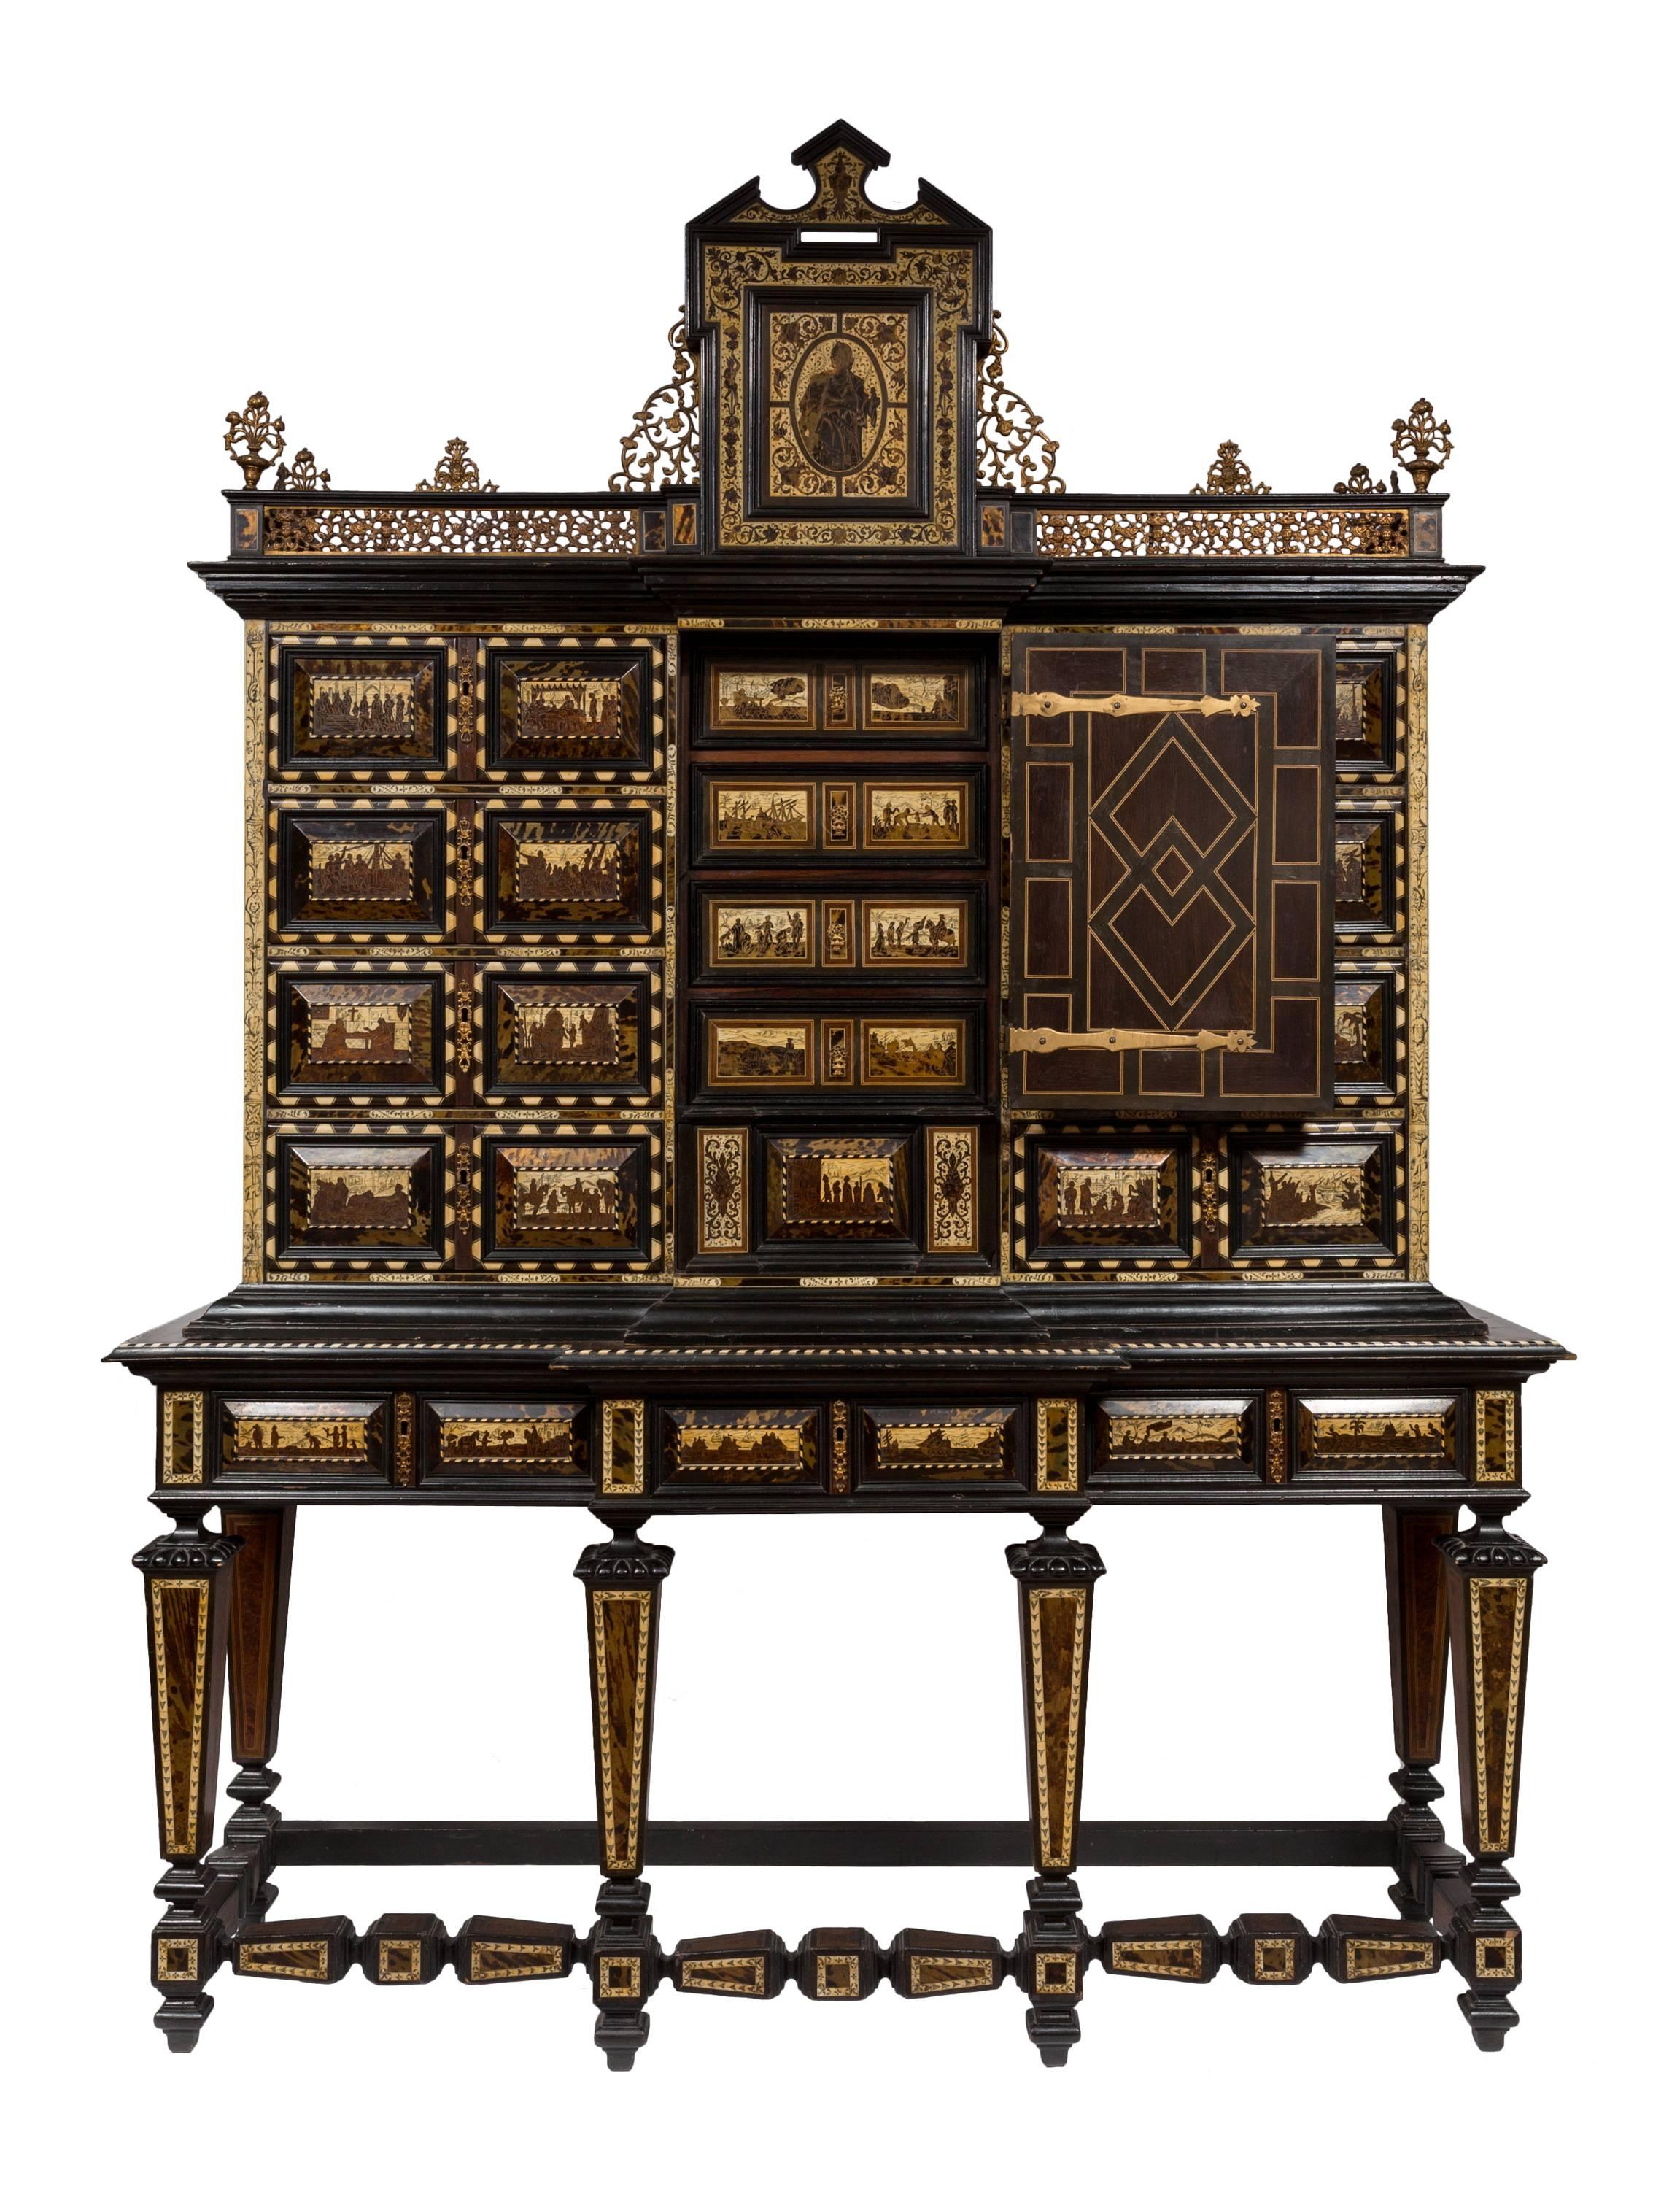 Large-scale 19th century Spanish bargueño / vargueño (secretary/desk) decorated with scenes of Columbus discovering the New World.
Thirty-one detailed vingettes created in bone and tortoiseshell inlay illustrate drawer fronts showing various